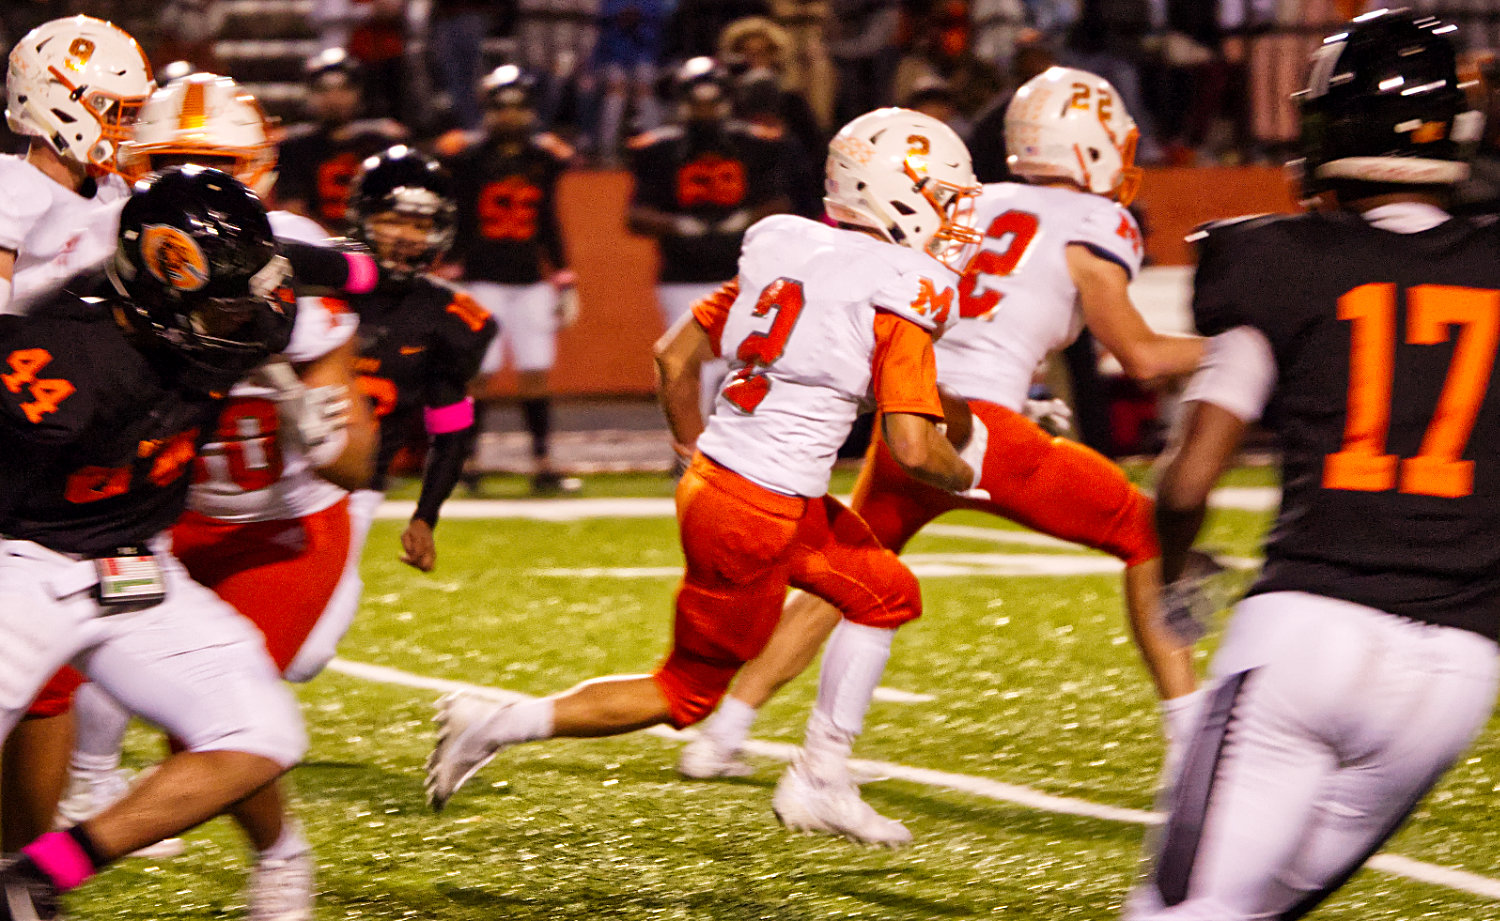 Dalton Rodgers (2) dashes through the Bears' defense Friday in Gladewater.